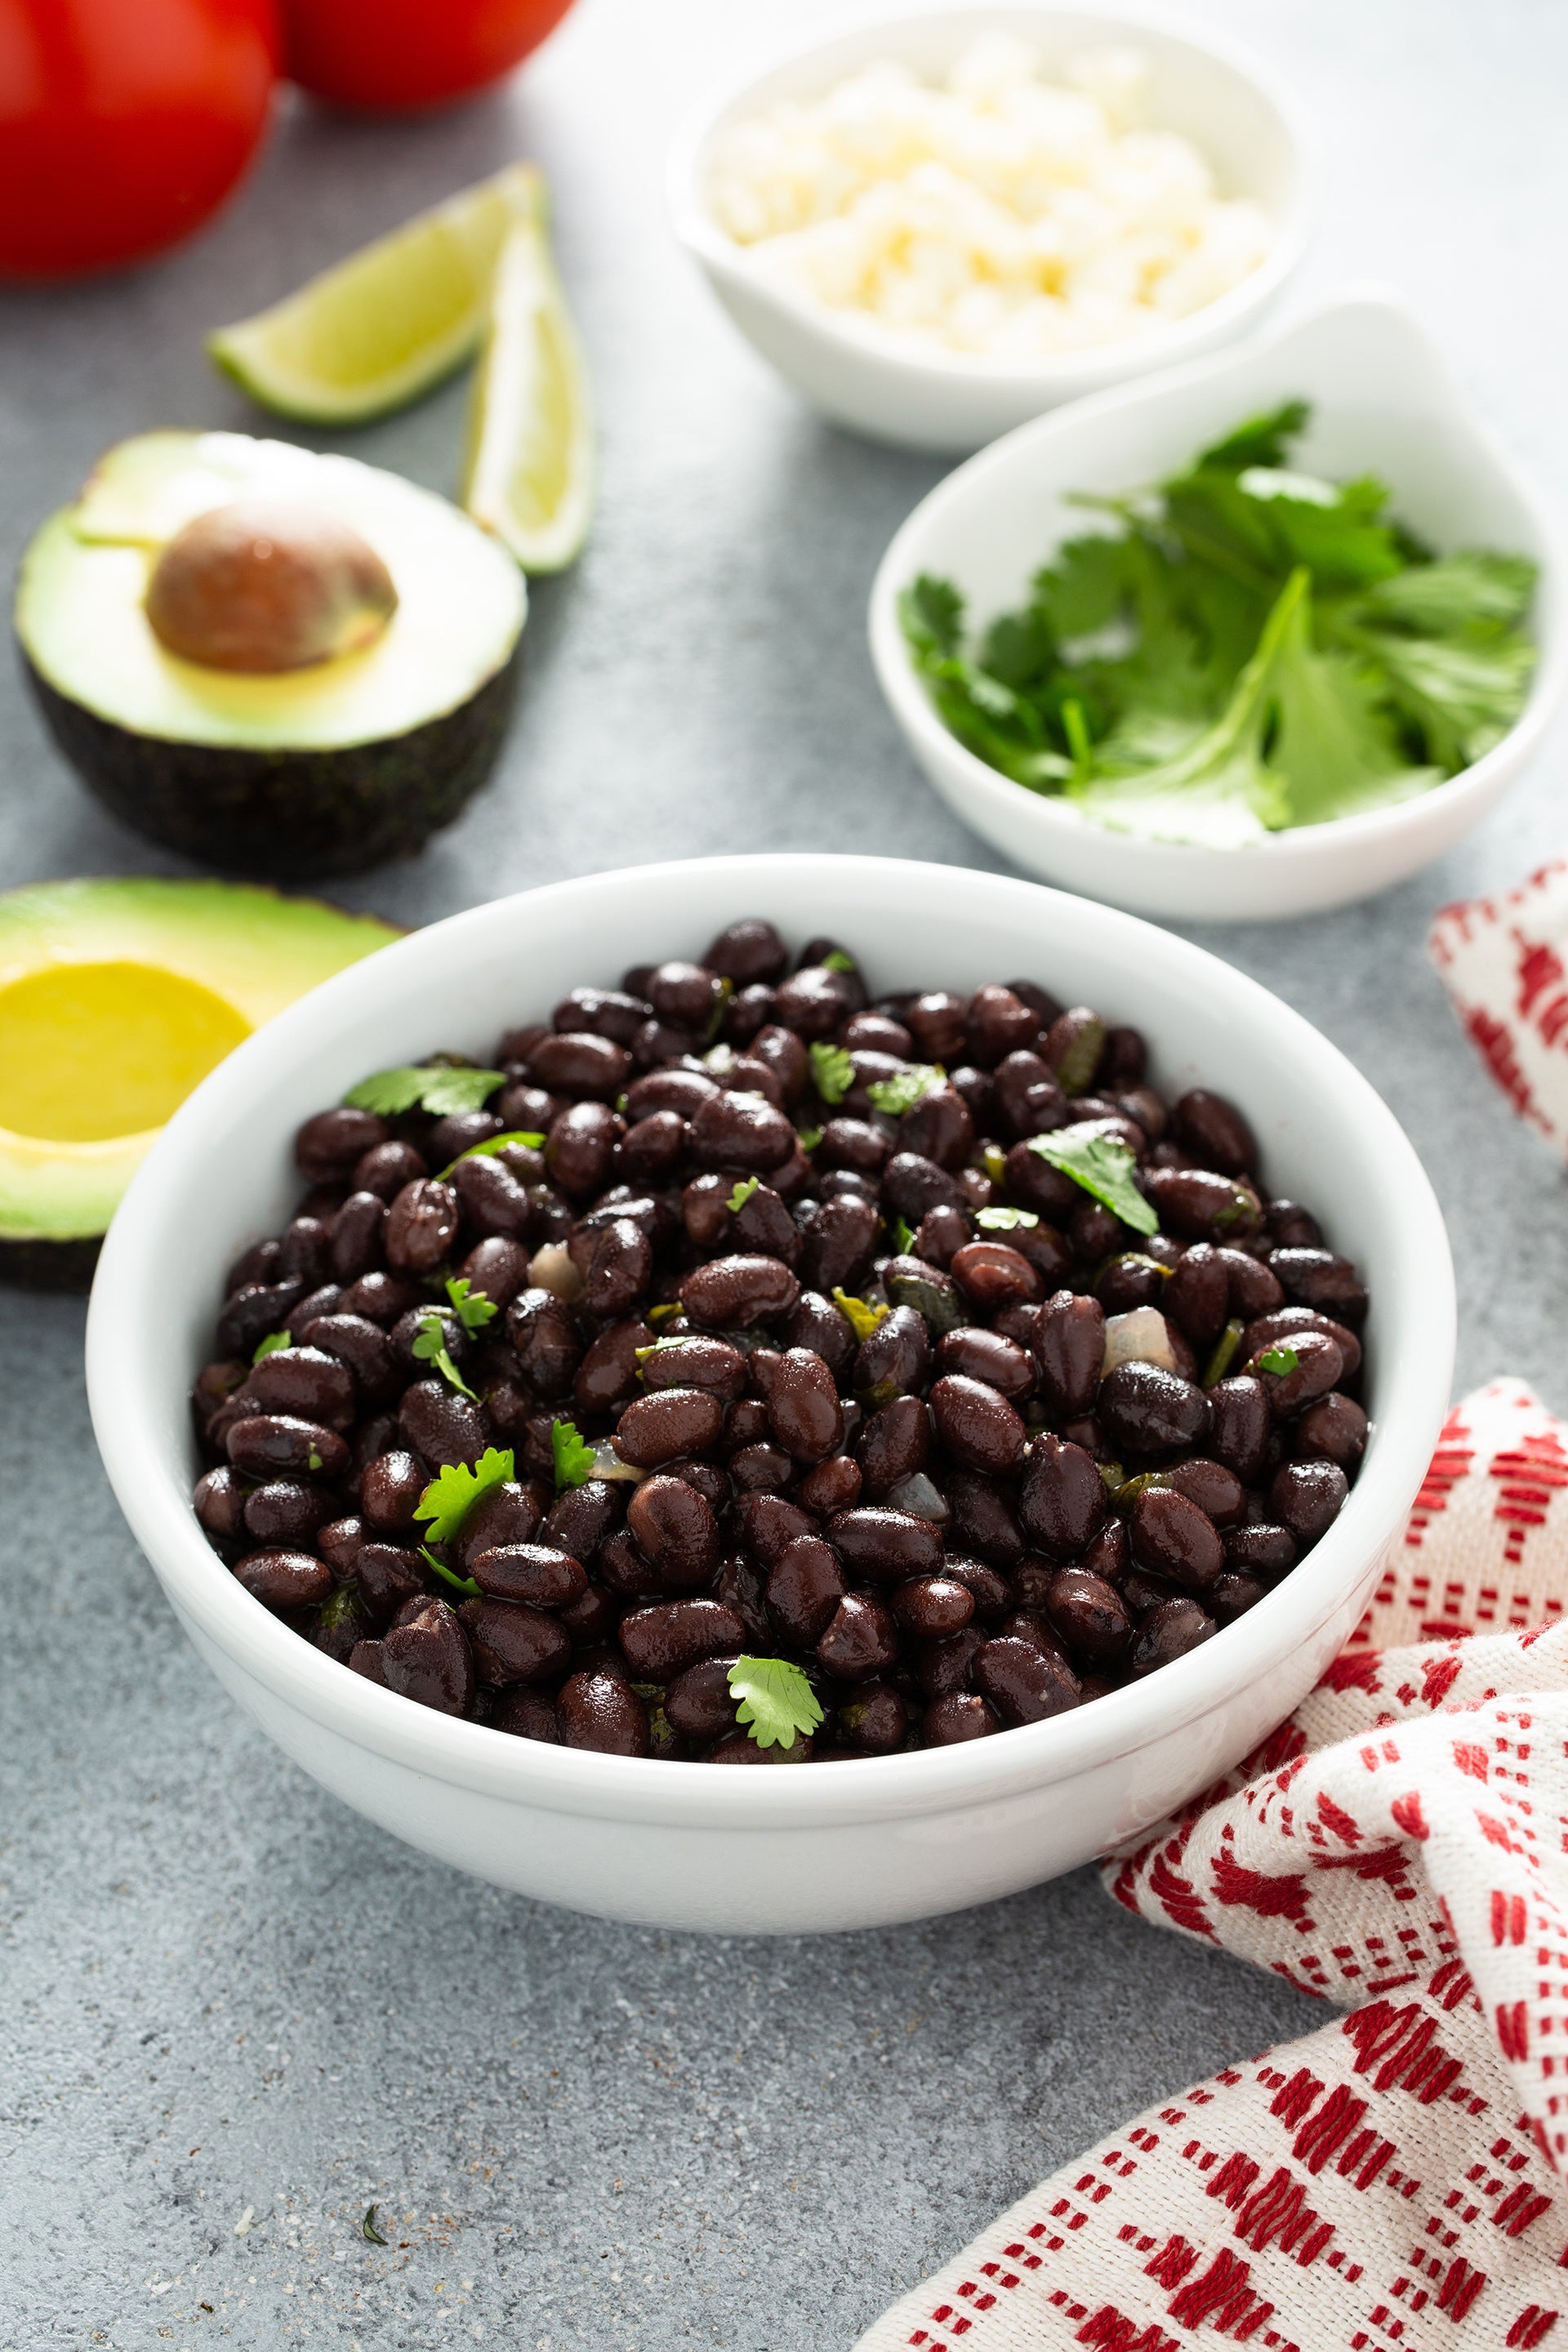 Bowl of black beans and other organic ingredients used in Kekoa Foods baby food puree.